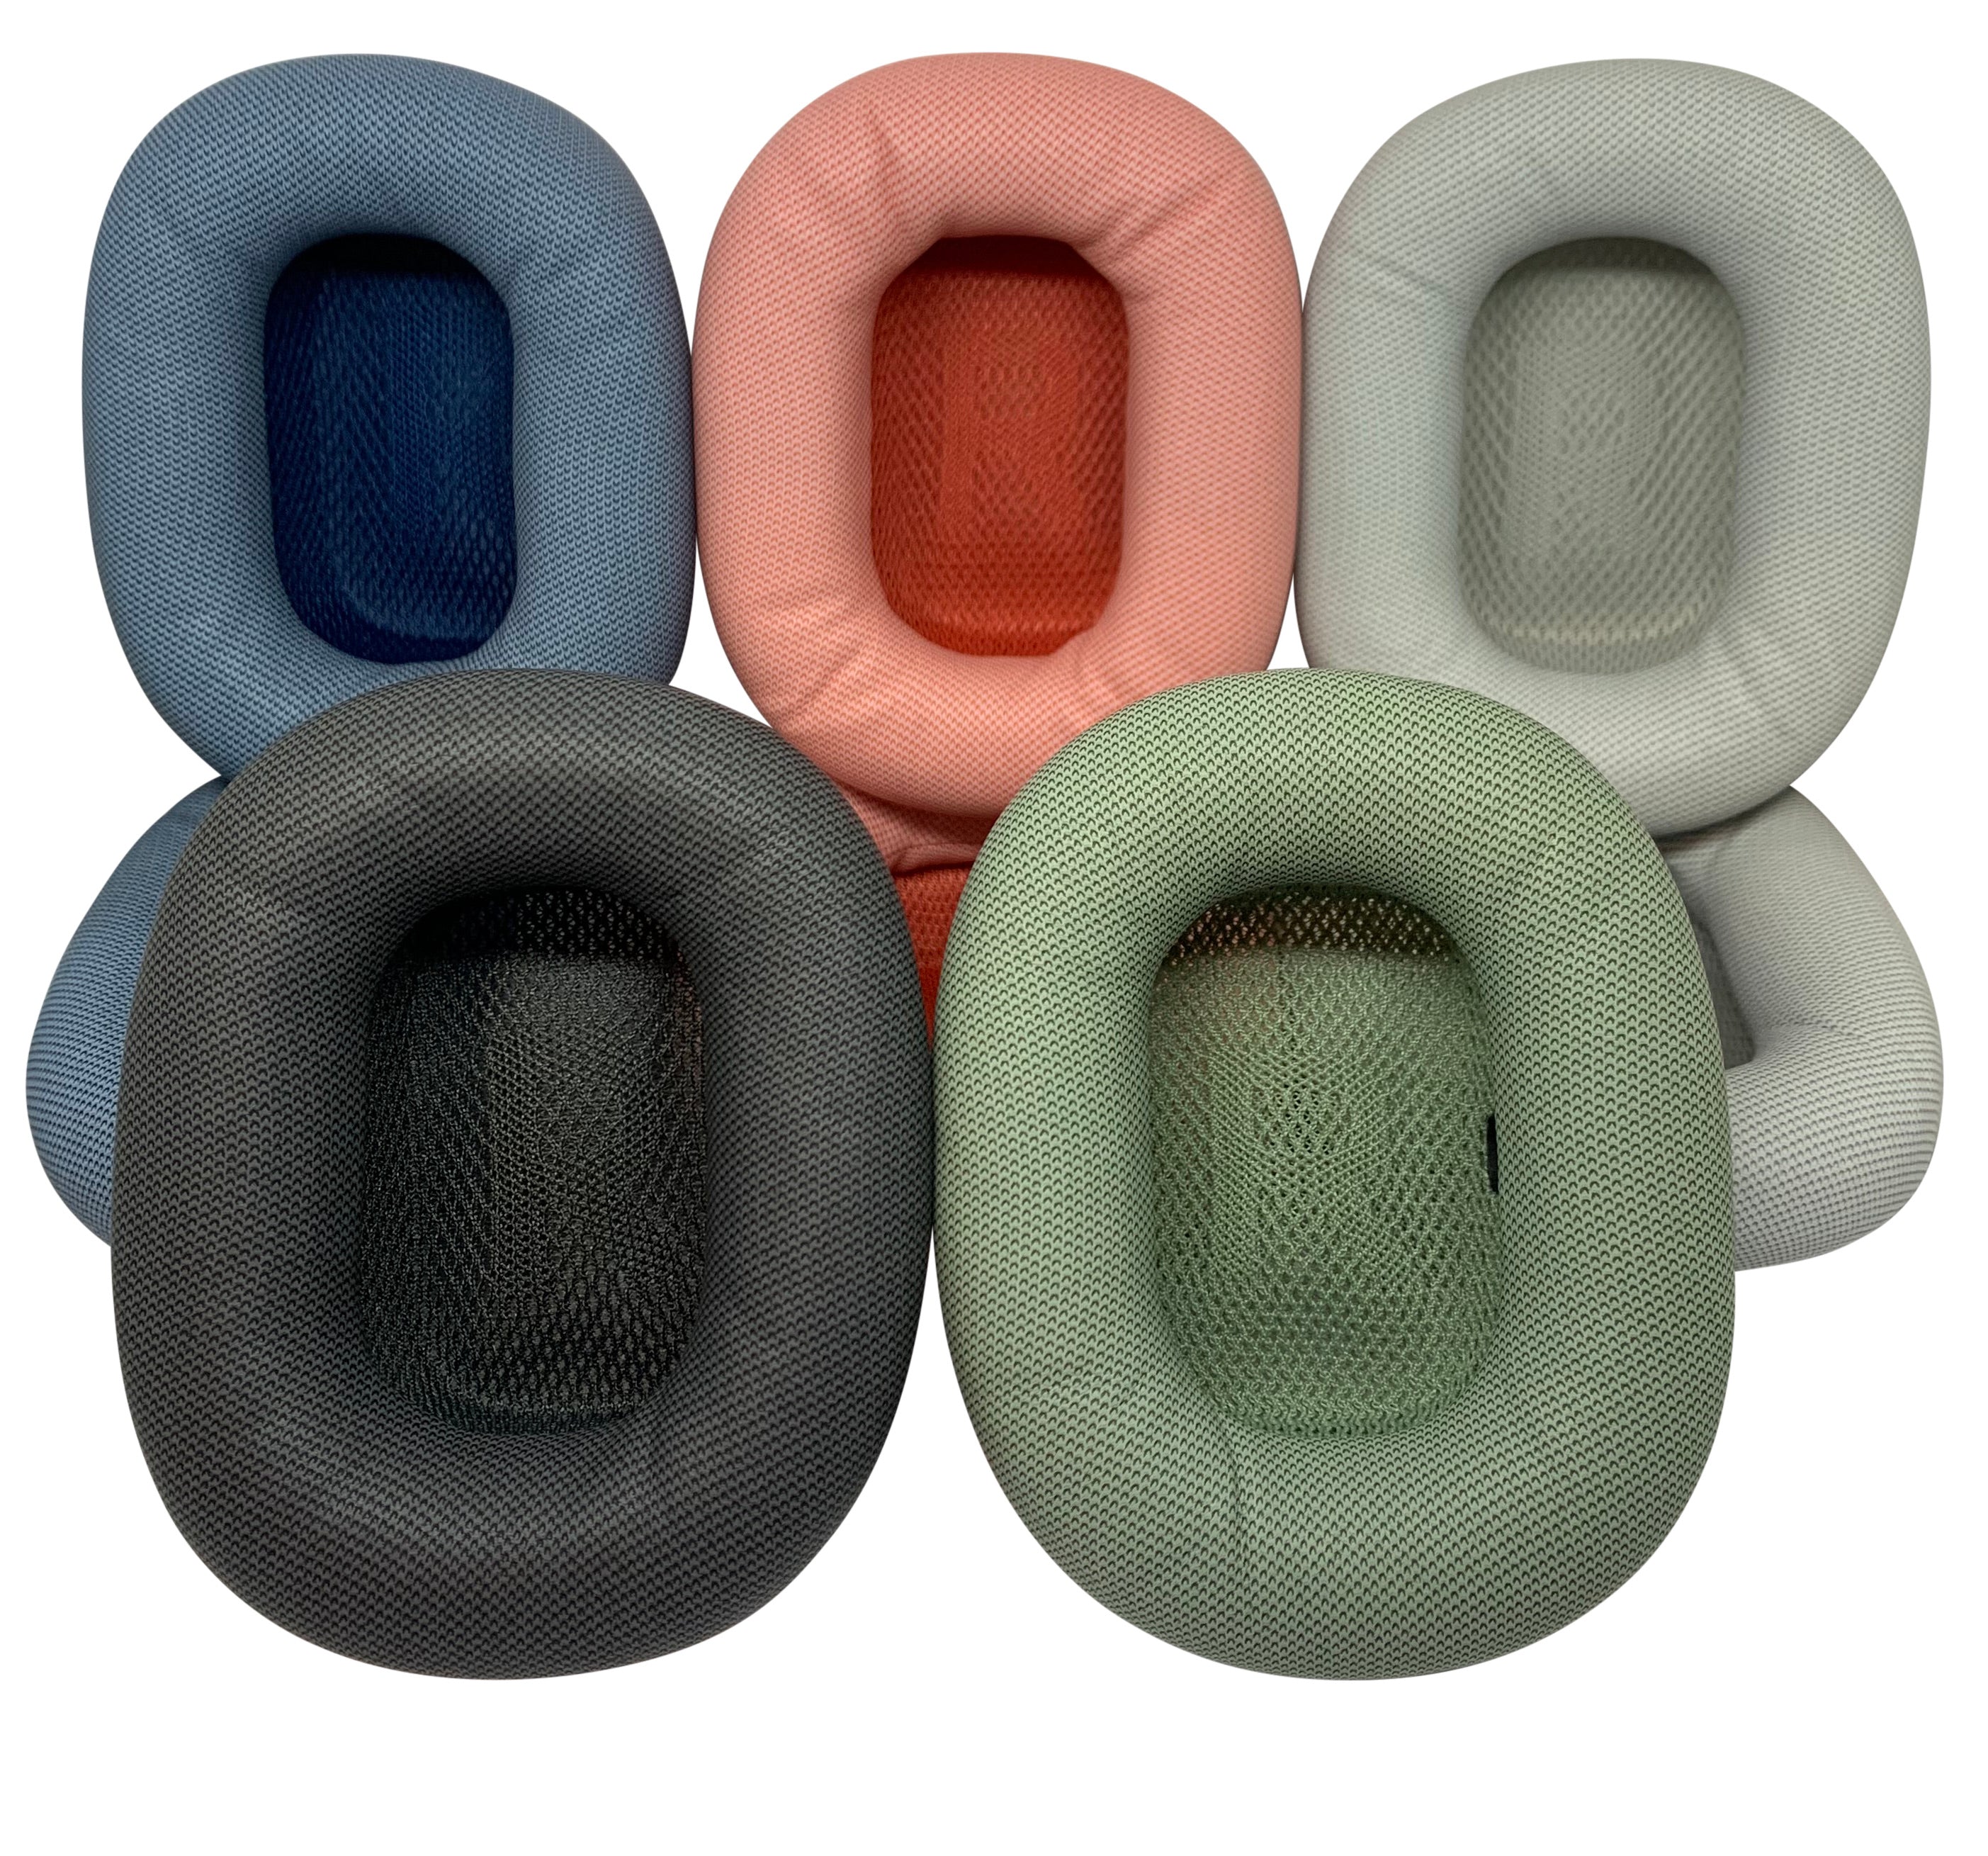 CentralSound USA Replacement Ear Pad Cushions for Apple AirPods Max Headphones - CentralSound